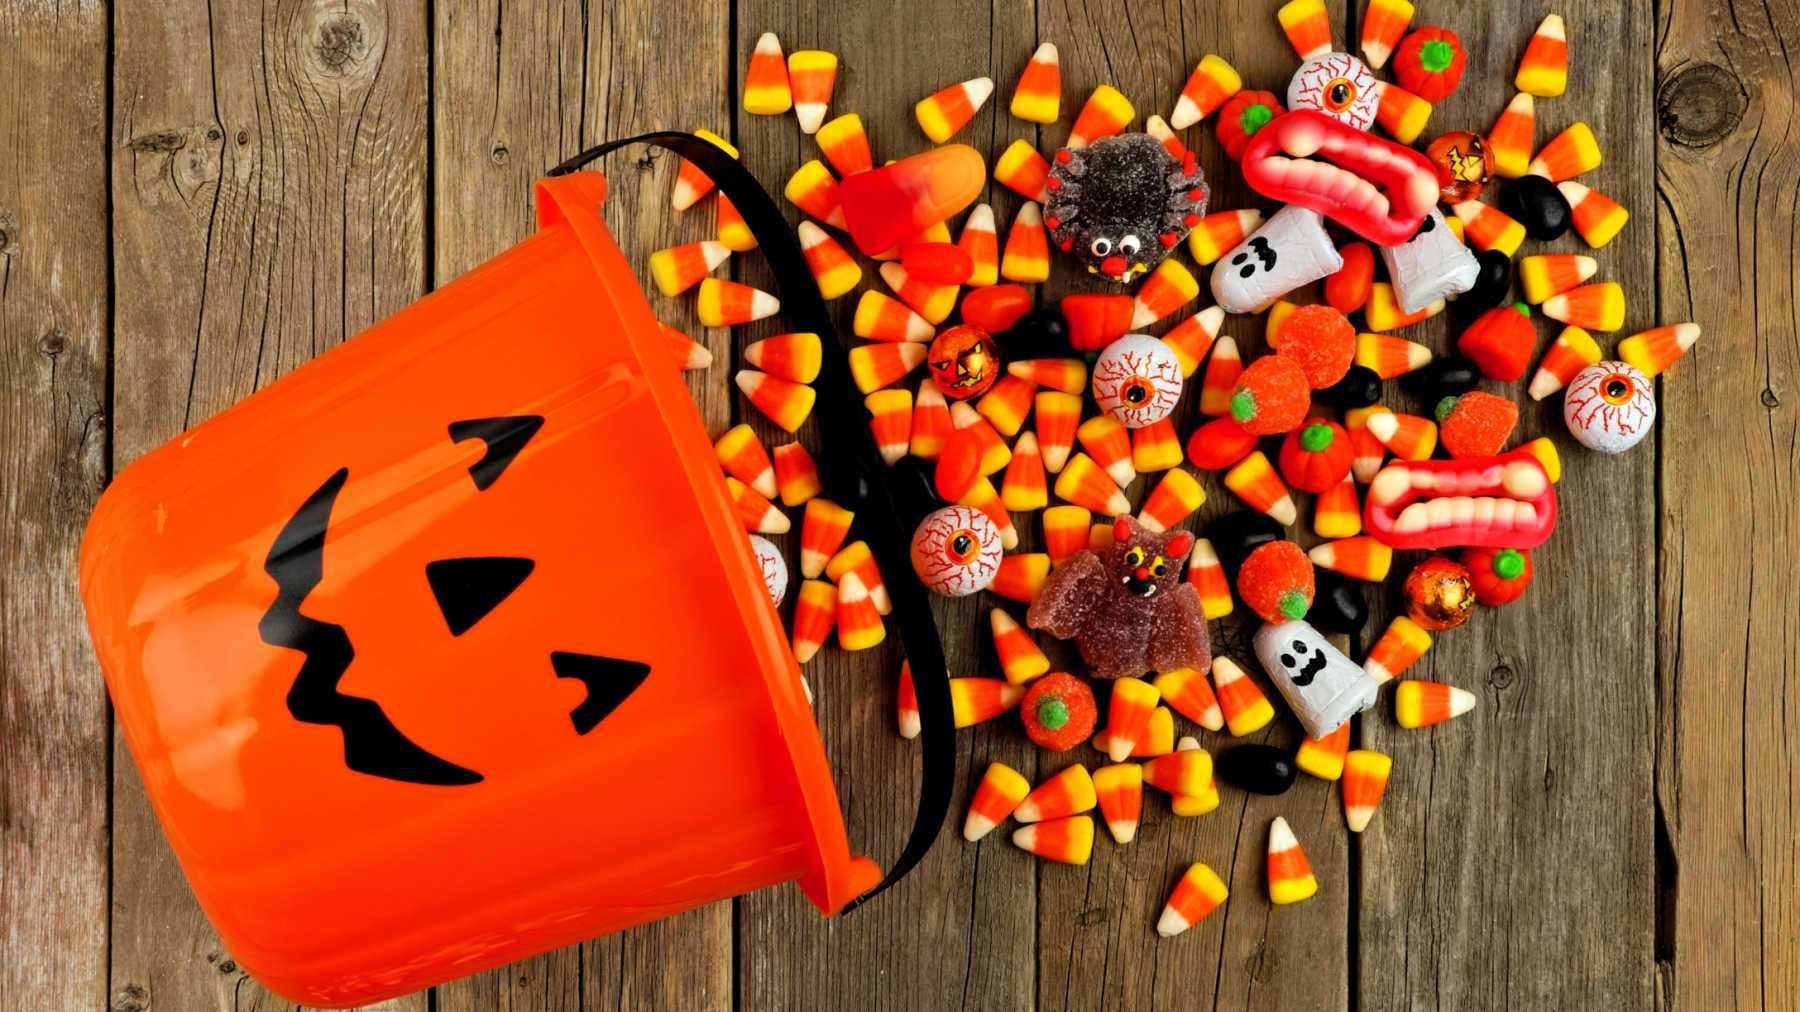 30-facts-about-candy-corn-and-other-halloween-treats-littlethings